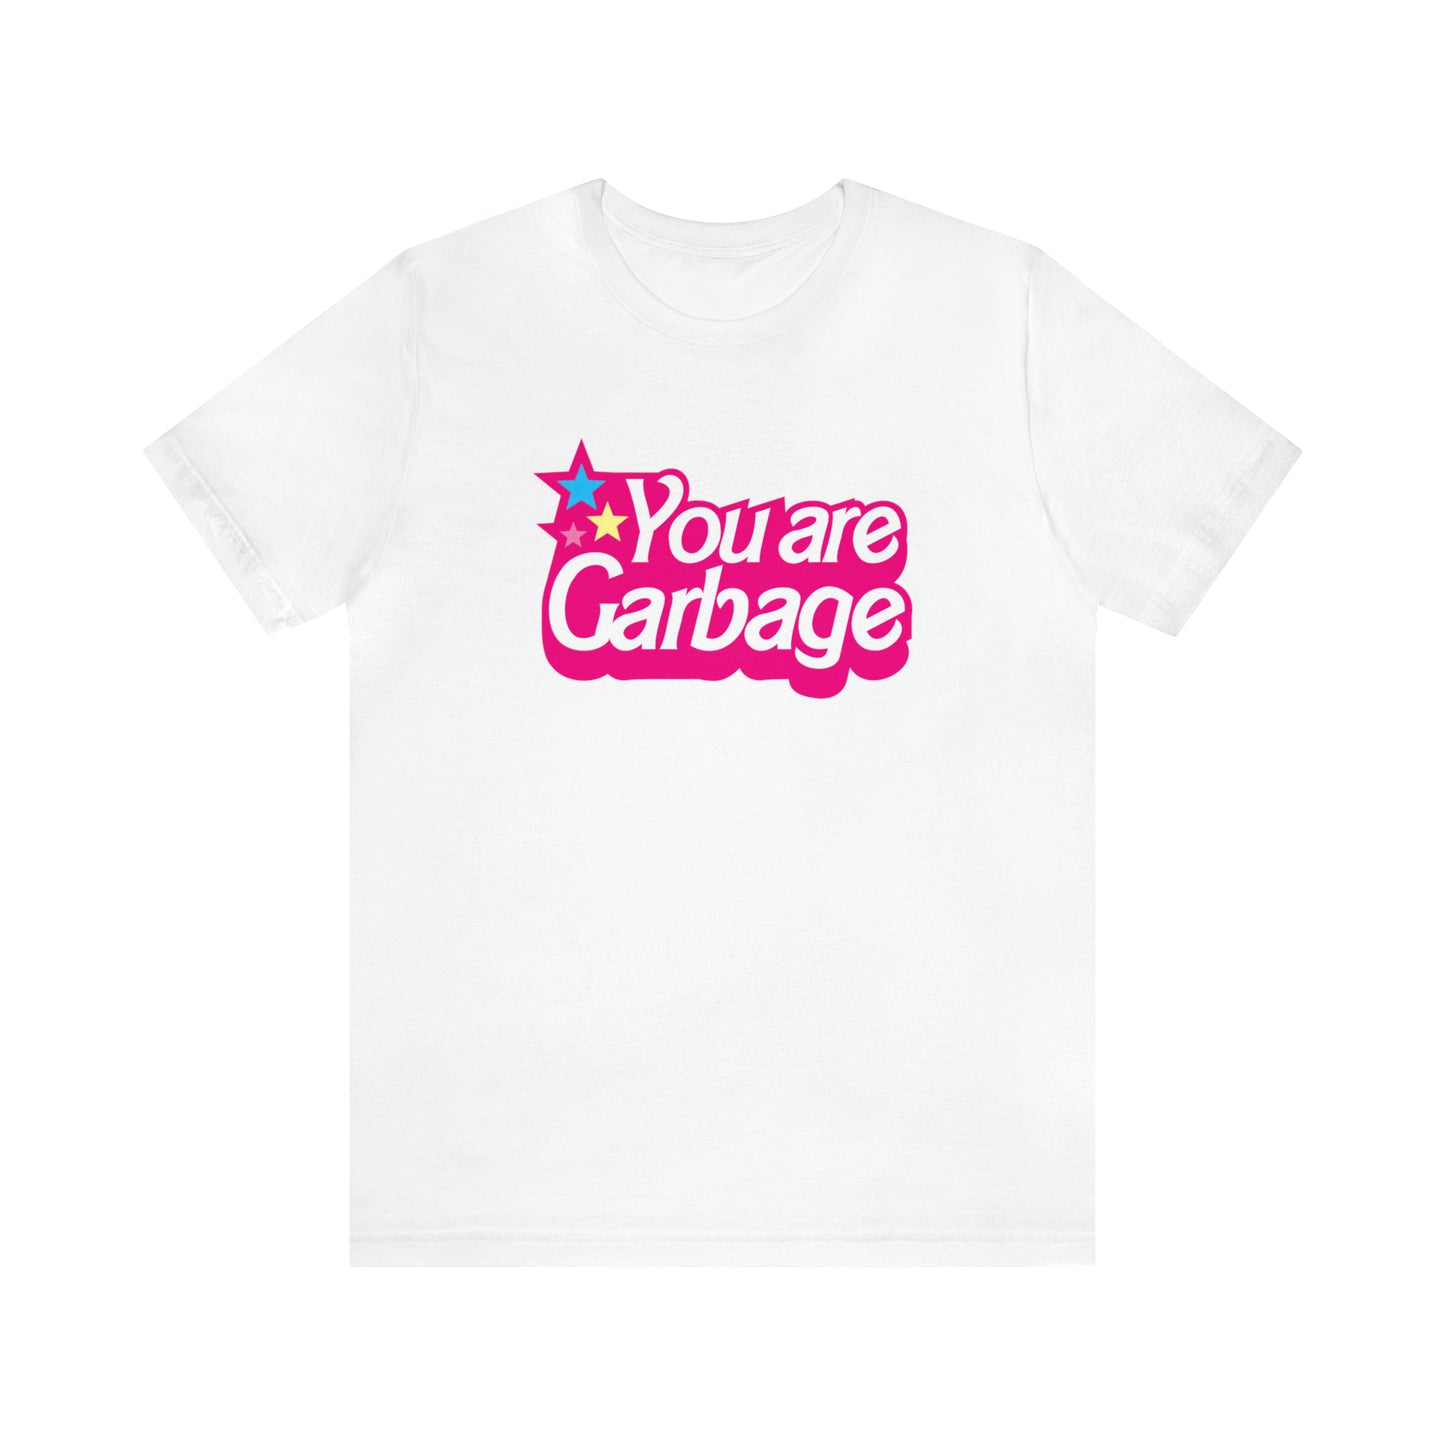 You Are Garbage T-Shirt